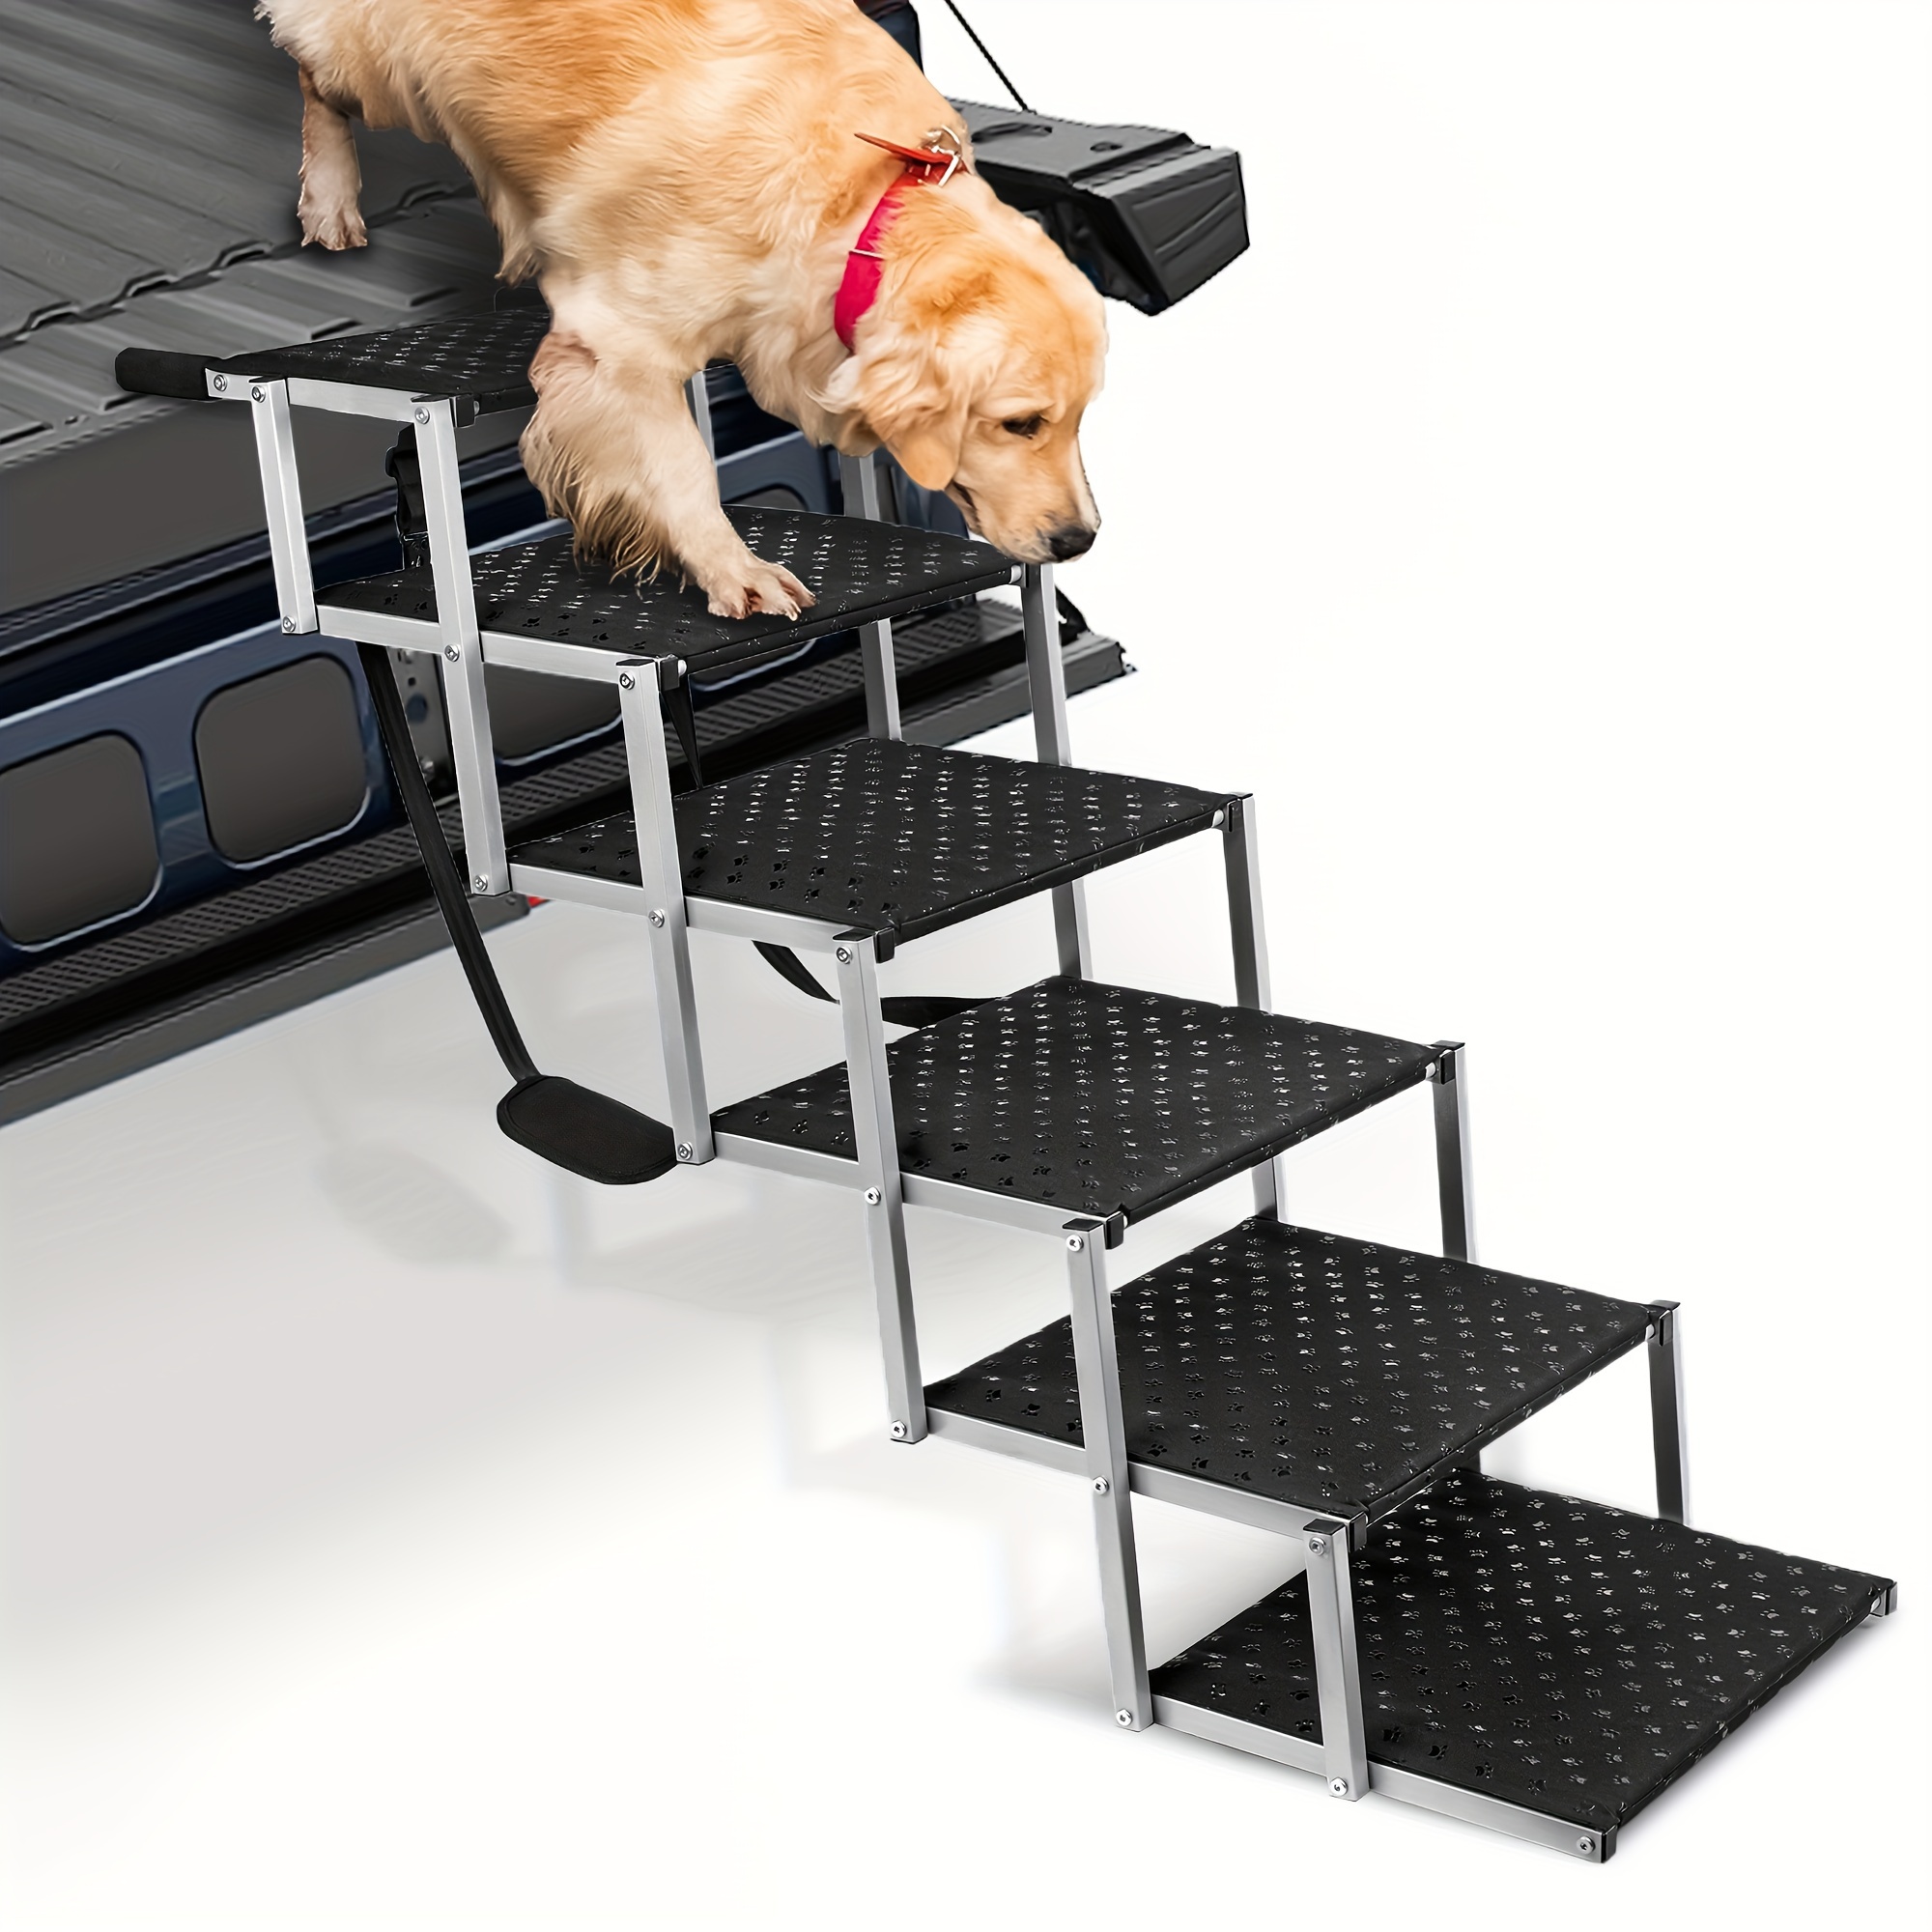 

Dog Ramps For Cars, Portable Folding Dog Stairs For Cars, Suv, Trucks, Lightweight Pet Ramp For Large Dogs With Non-slip Surface, Reinforced Dog Steps Supports Up To 200 Lb